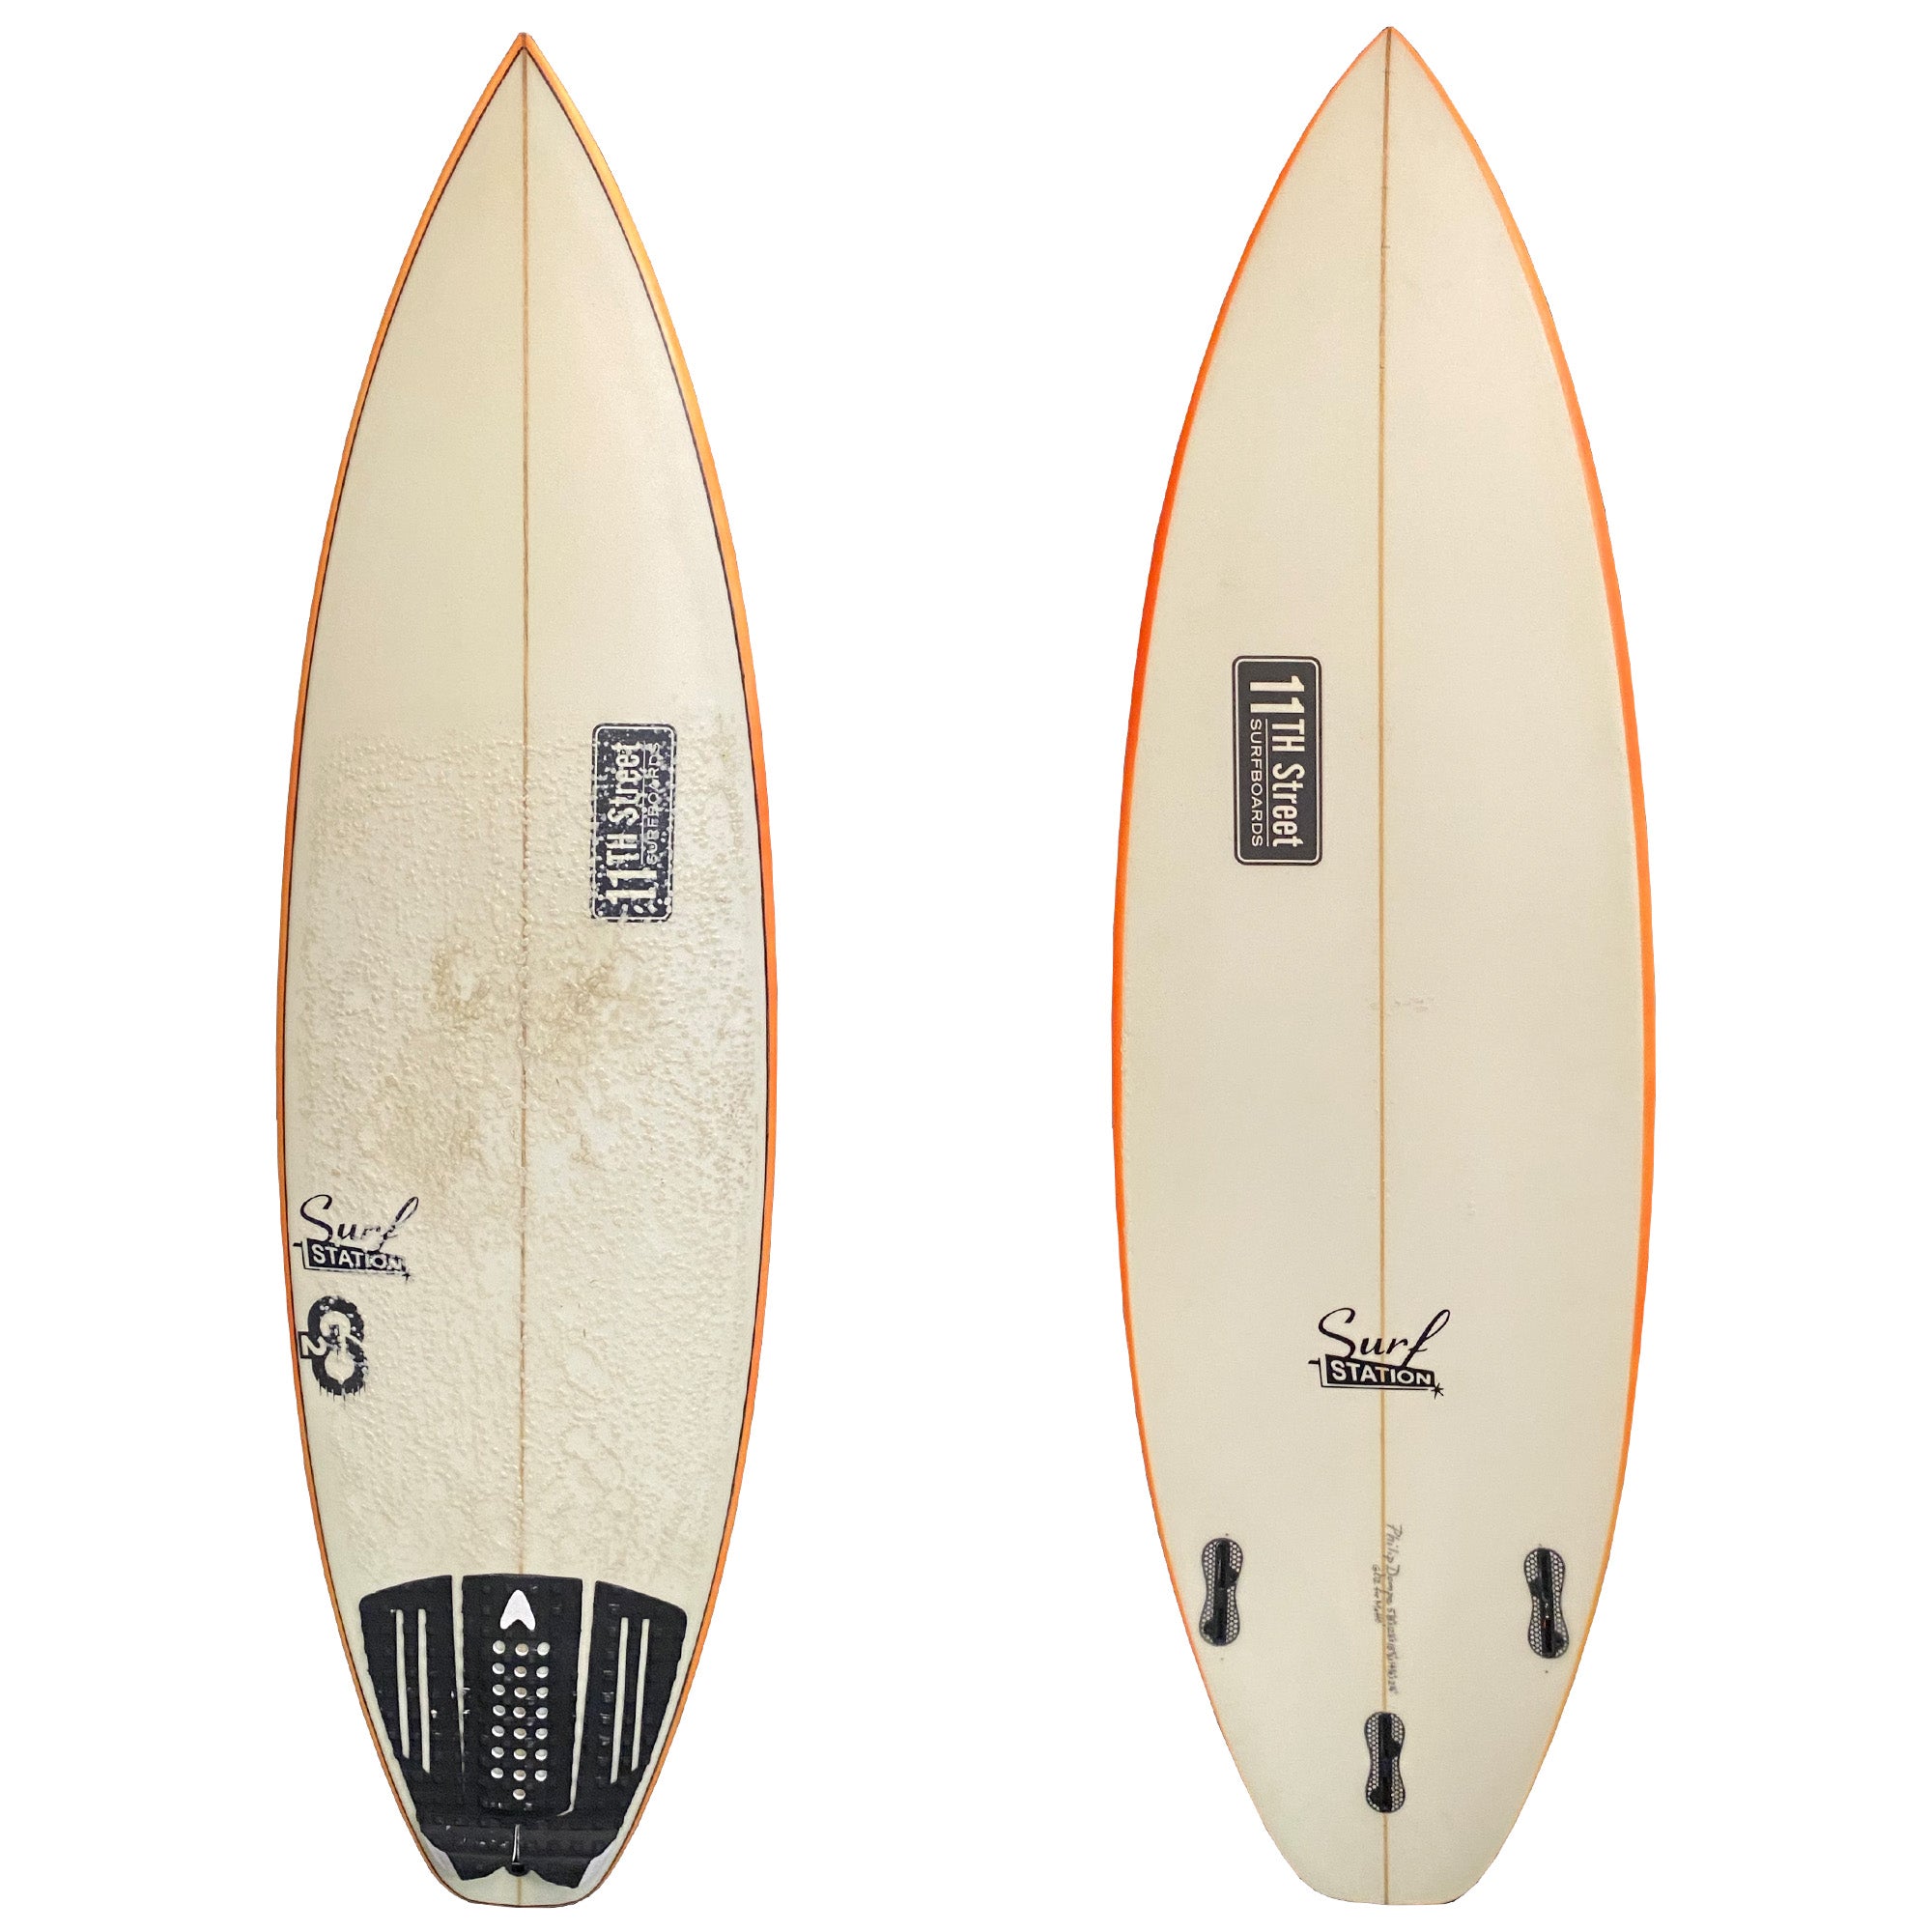 11th Street Surfboards Go2 5'8 Used Surfboard